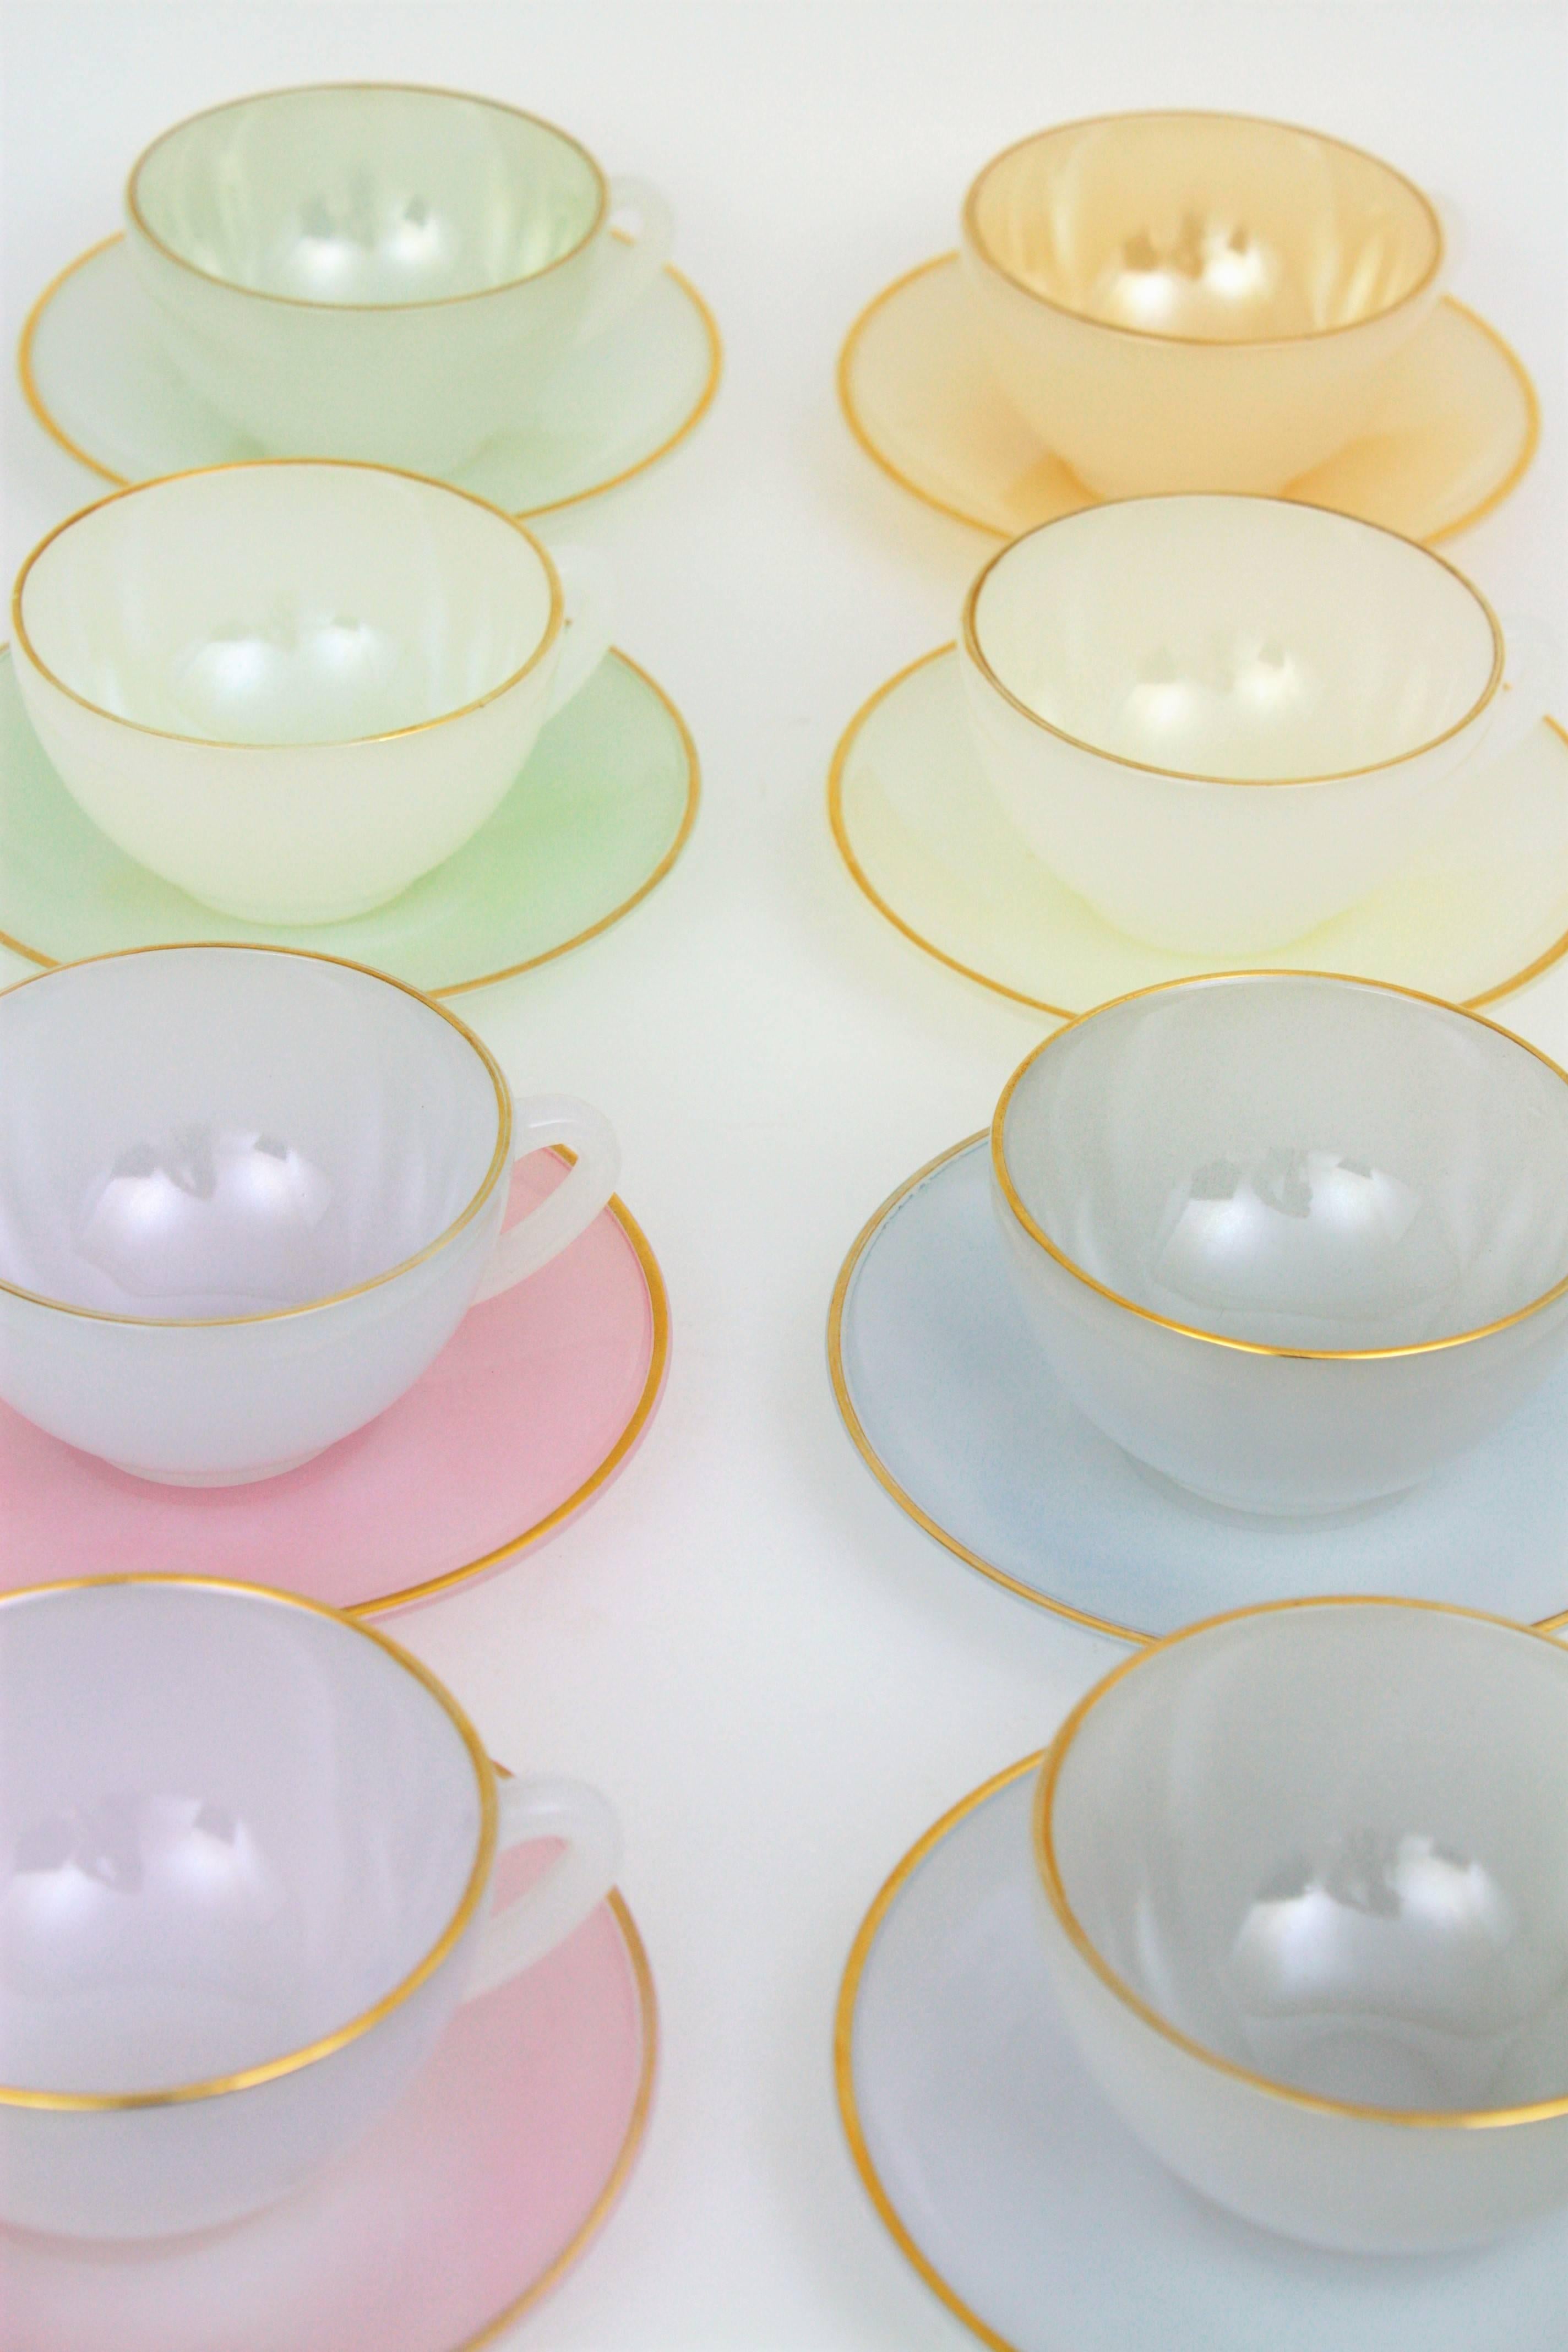 A highly decorative set of eight Harlequin opalescent pastel colors glass tea or coffee cups and dishes. Blue, green, peach and pink colors with a golden ribbon covering the edges of the plates and the cups. 
Manufactured by Arcopal, France,